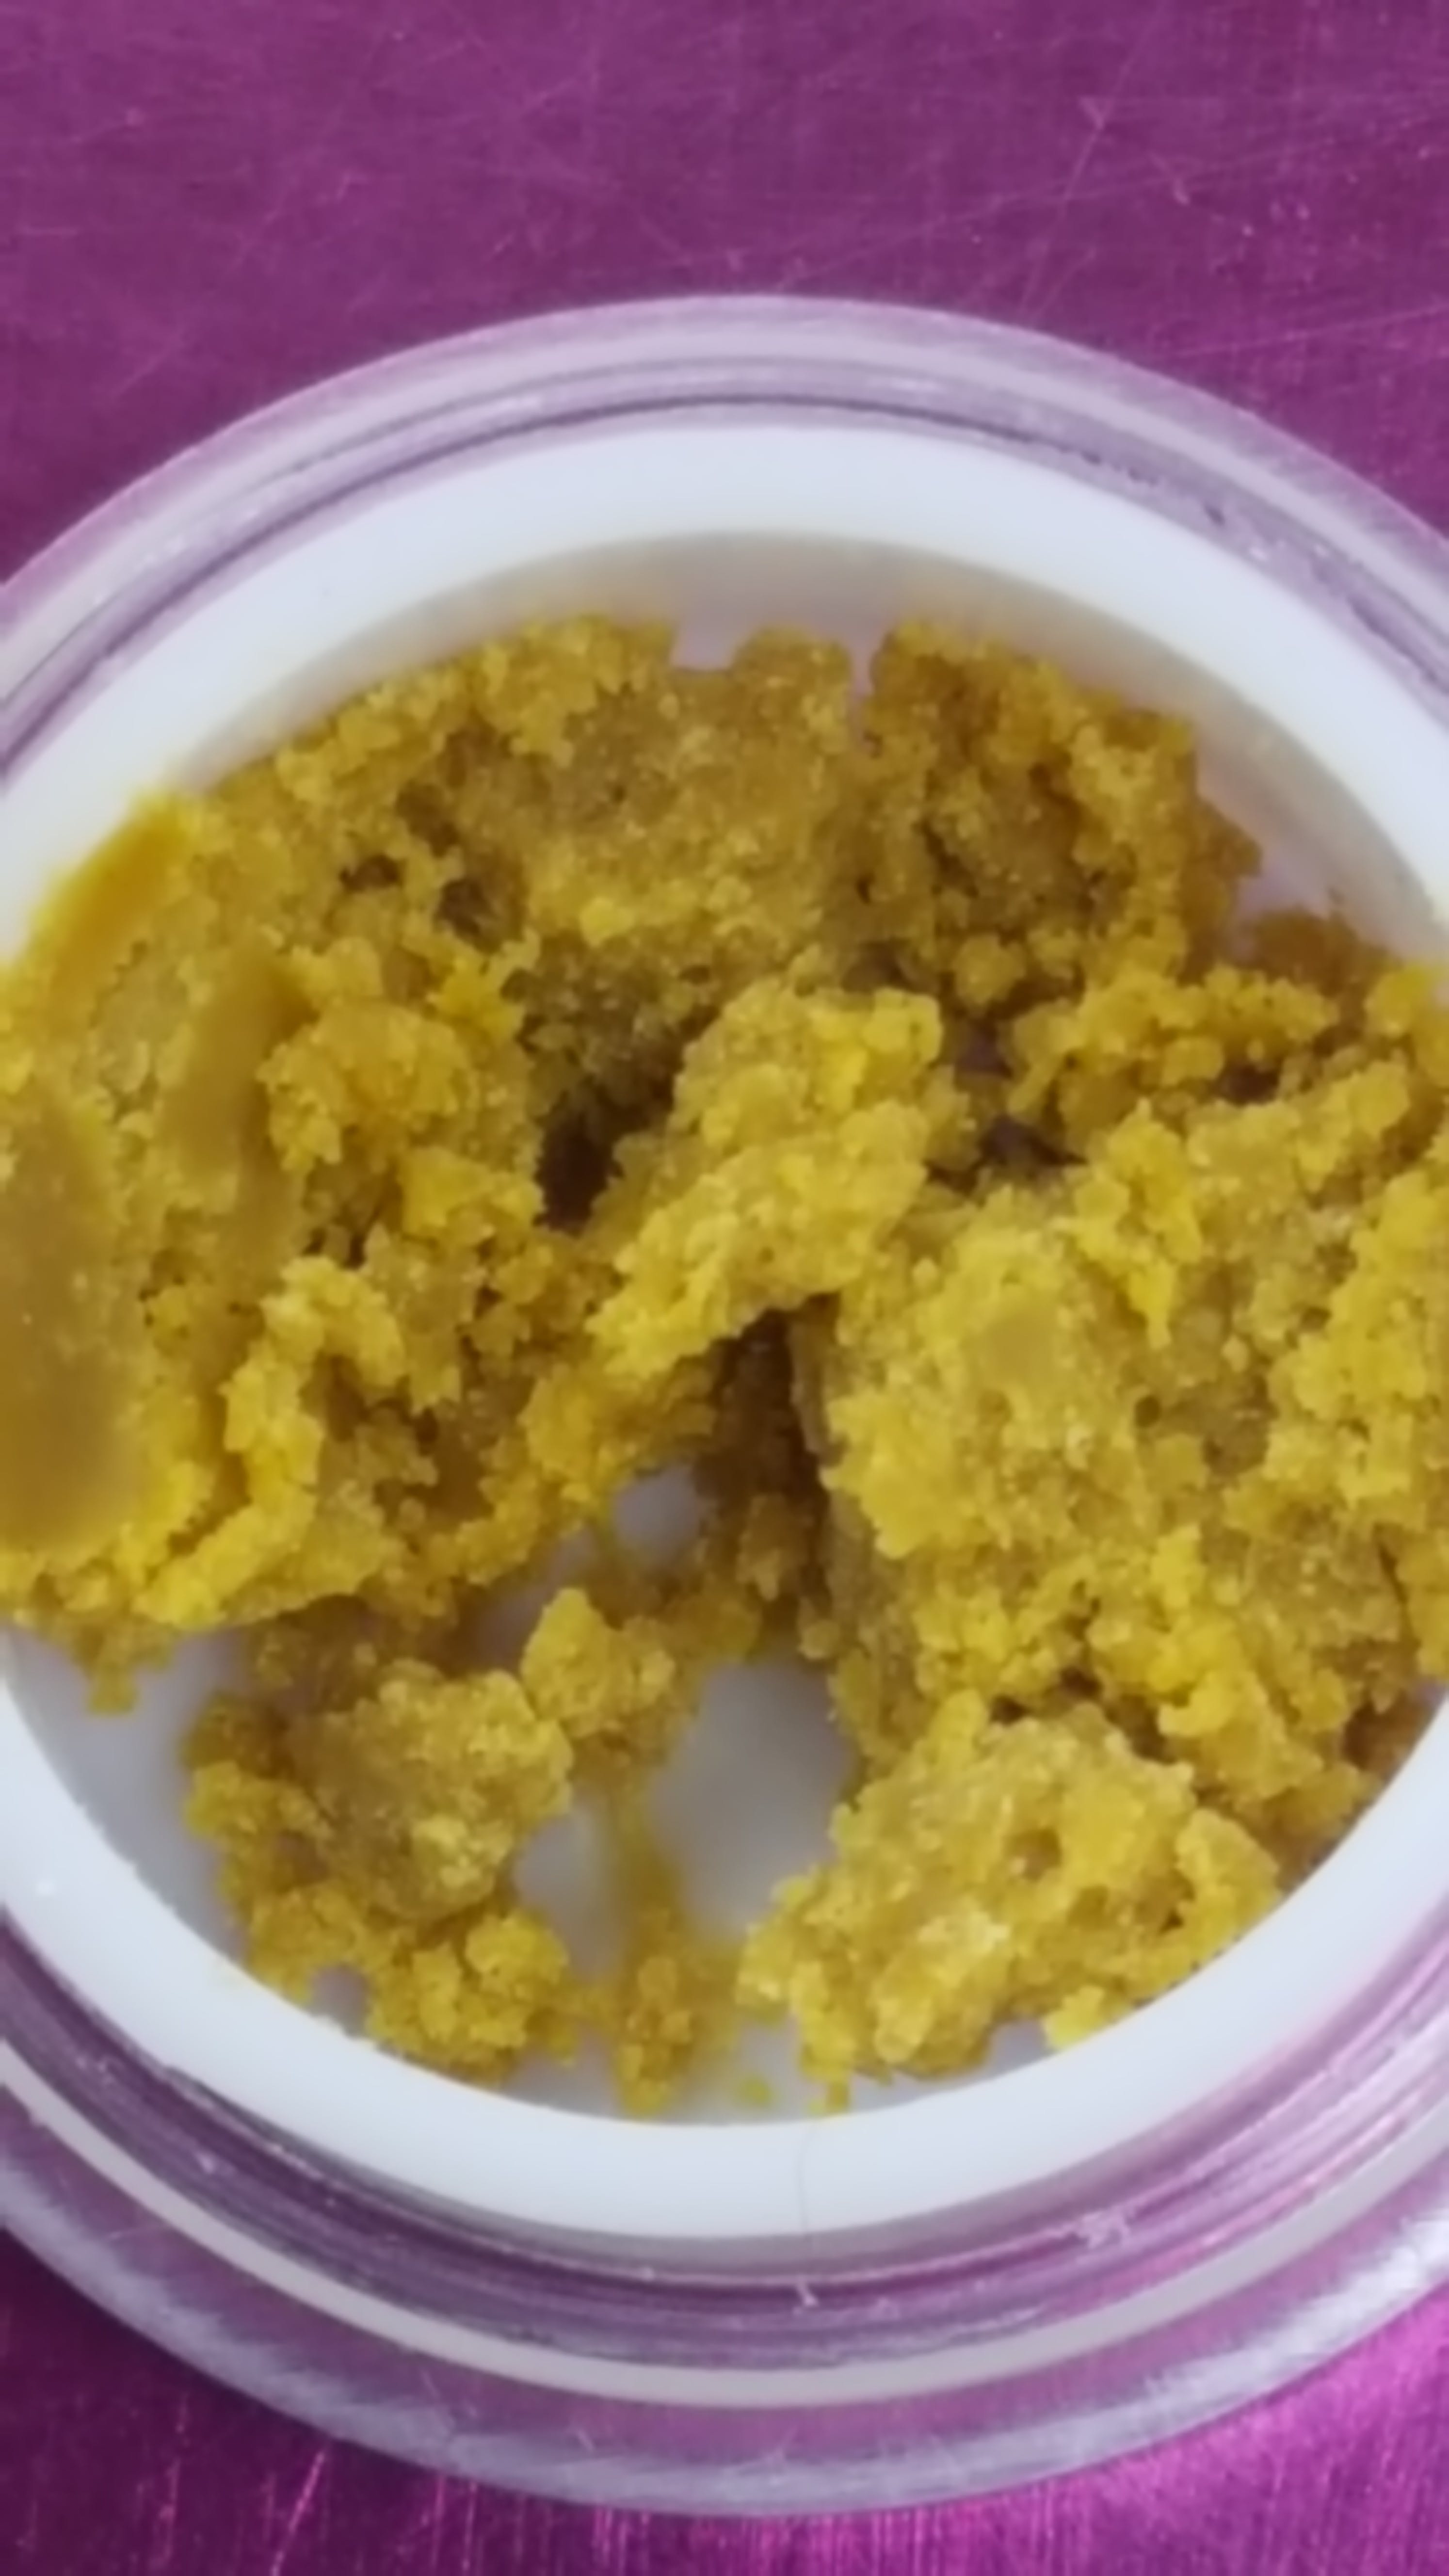 concentrate-cannasource-colorado-sweet-kush-wax